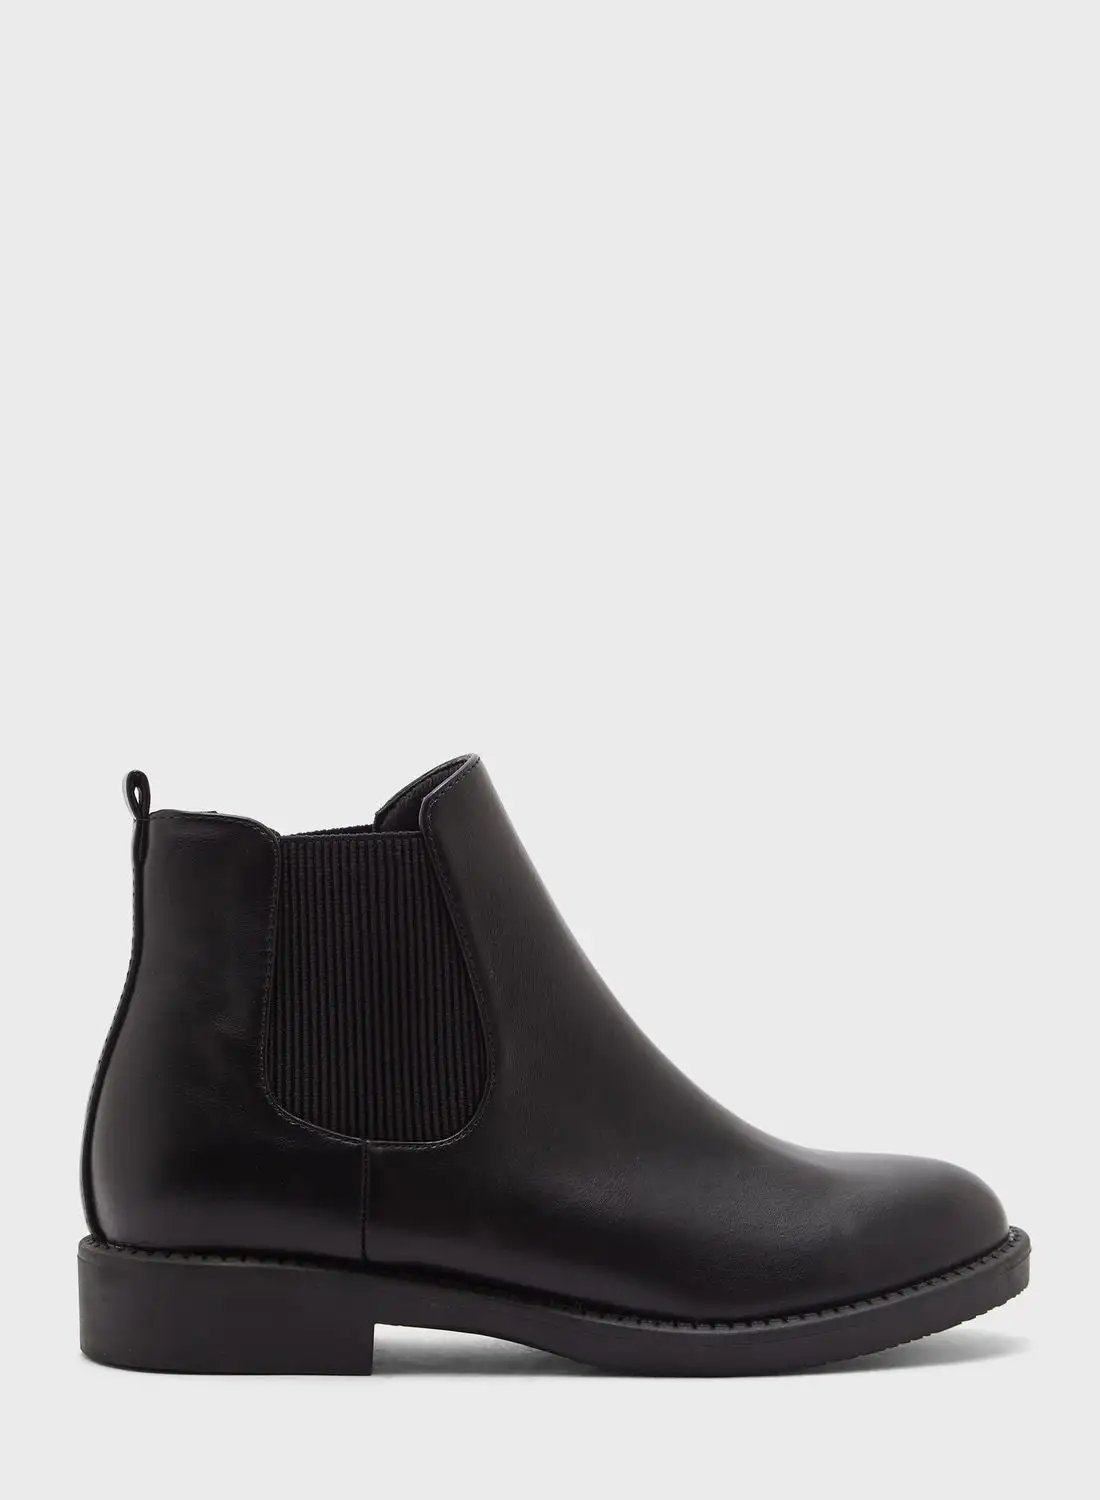 ELLA Round Chelsea Ankle Boot